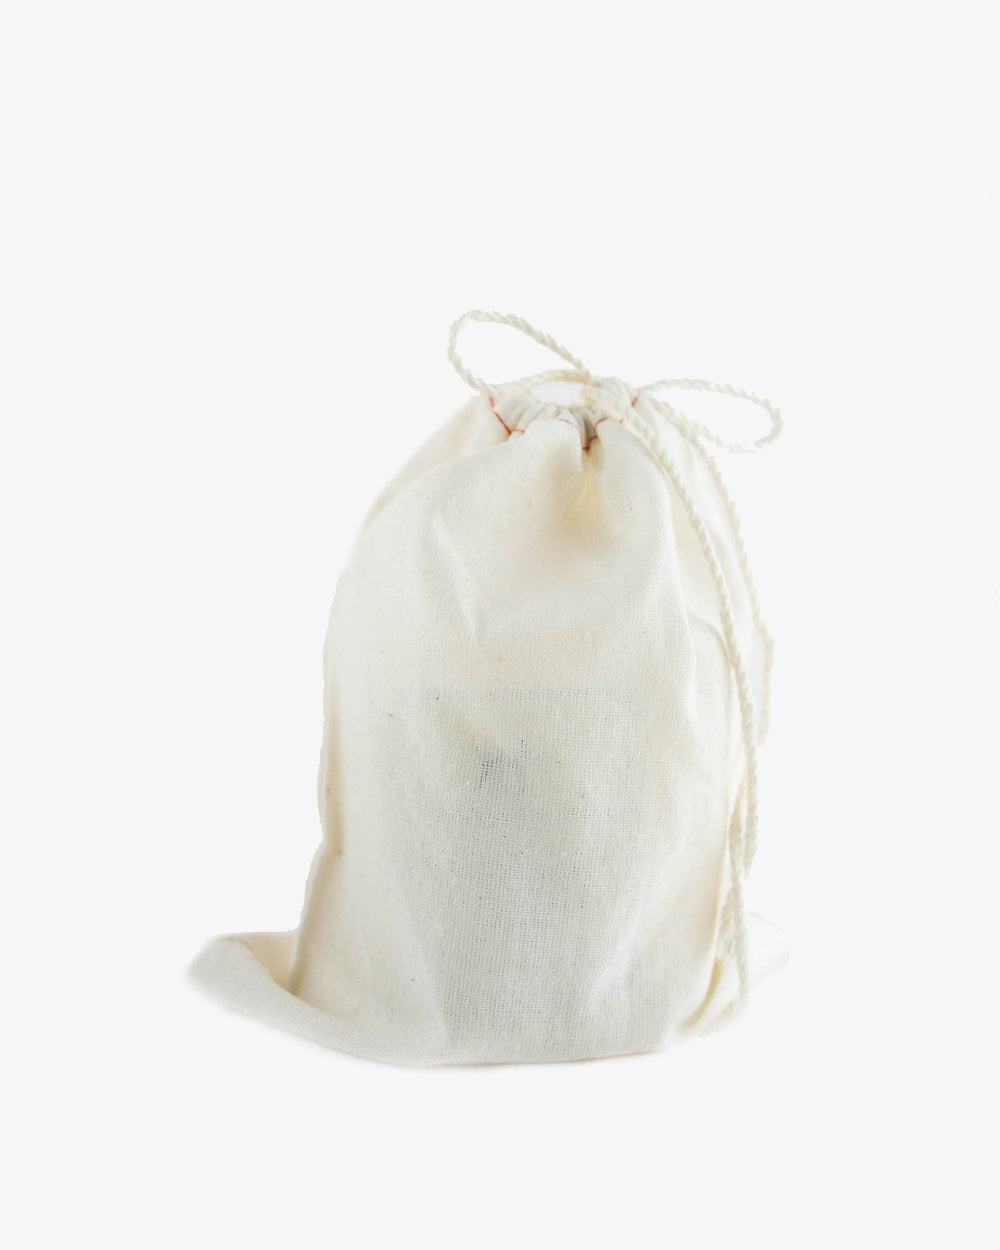 The bagged view of the Southern Tide Southern Tide Carolina Coast Candle by Southern Tide - Carolina Coast